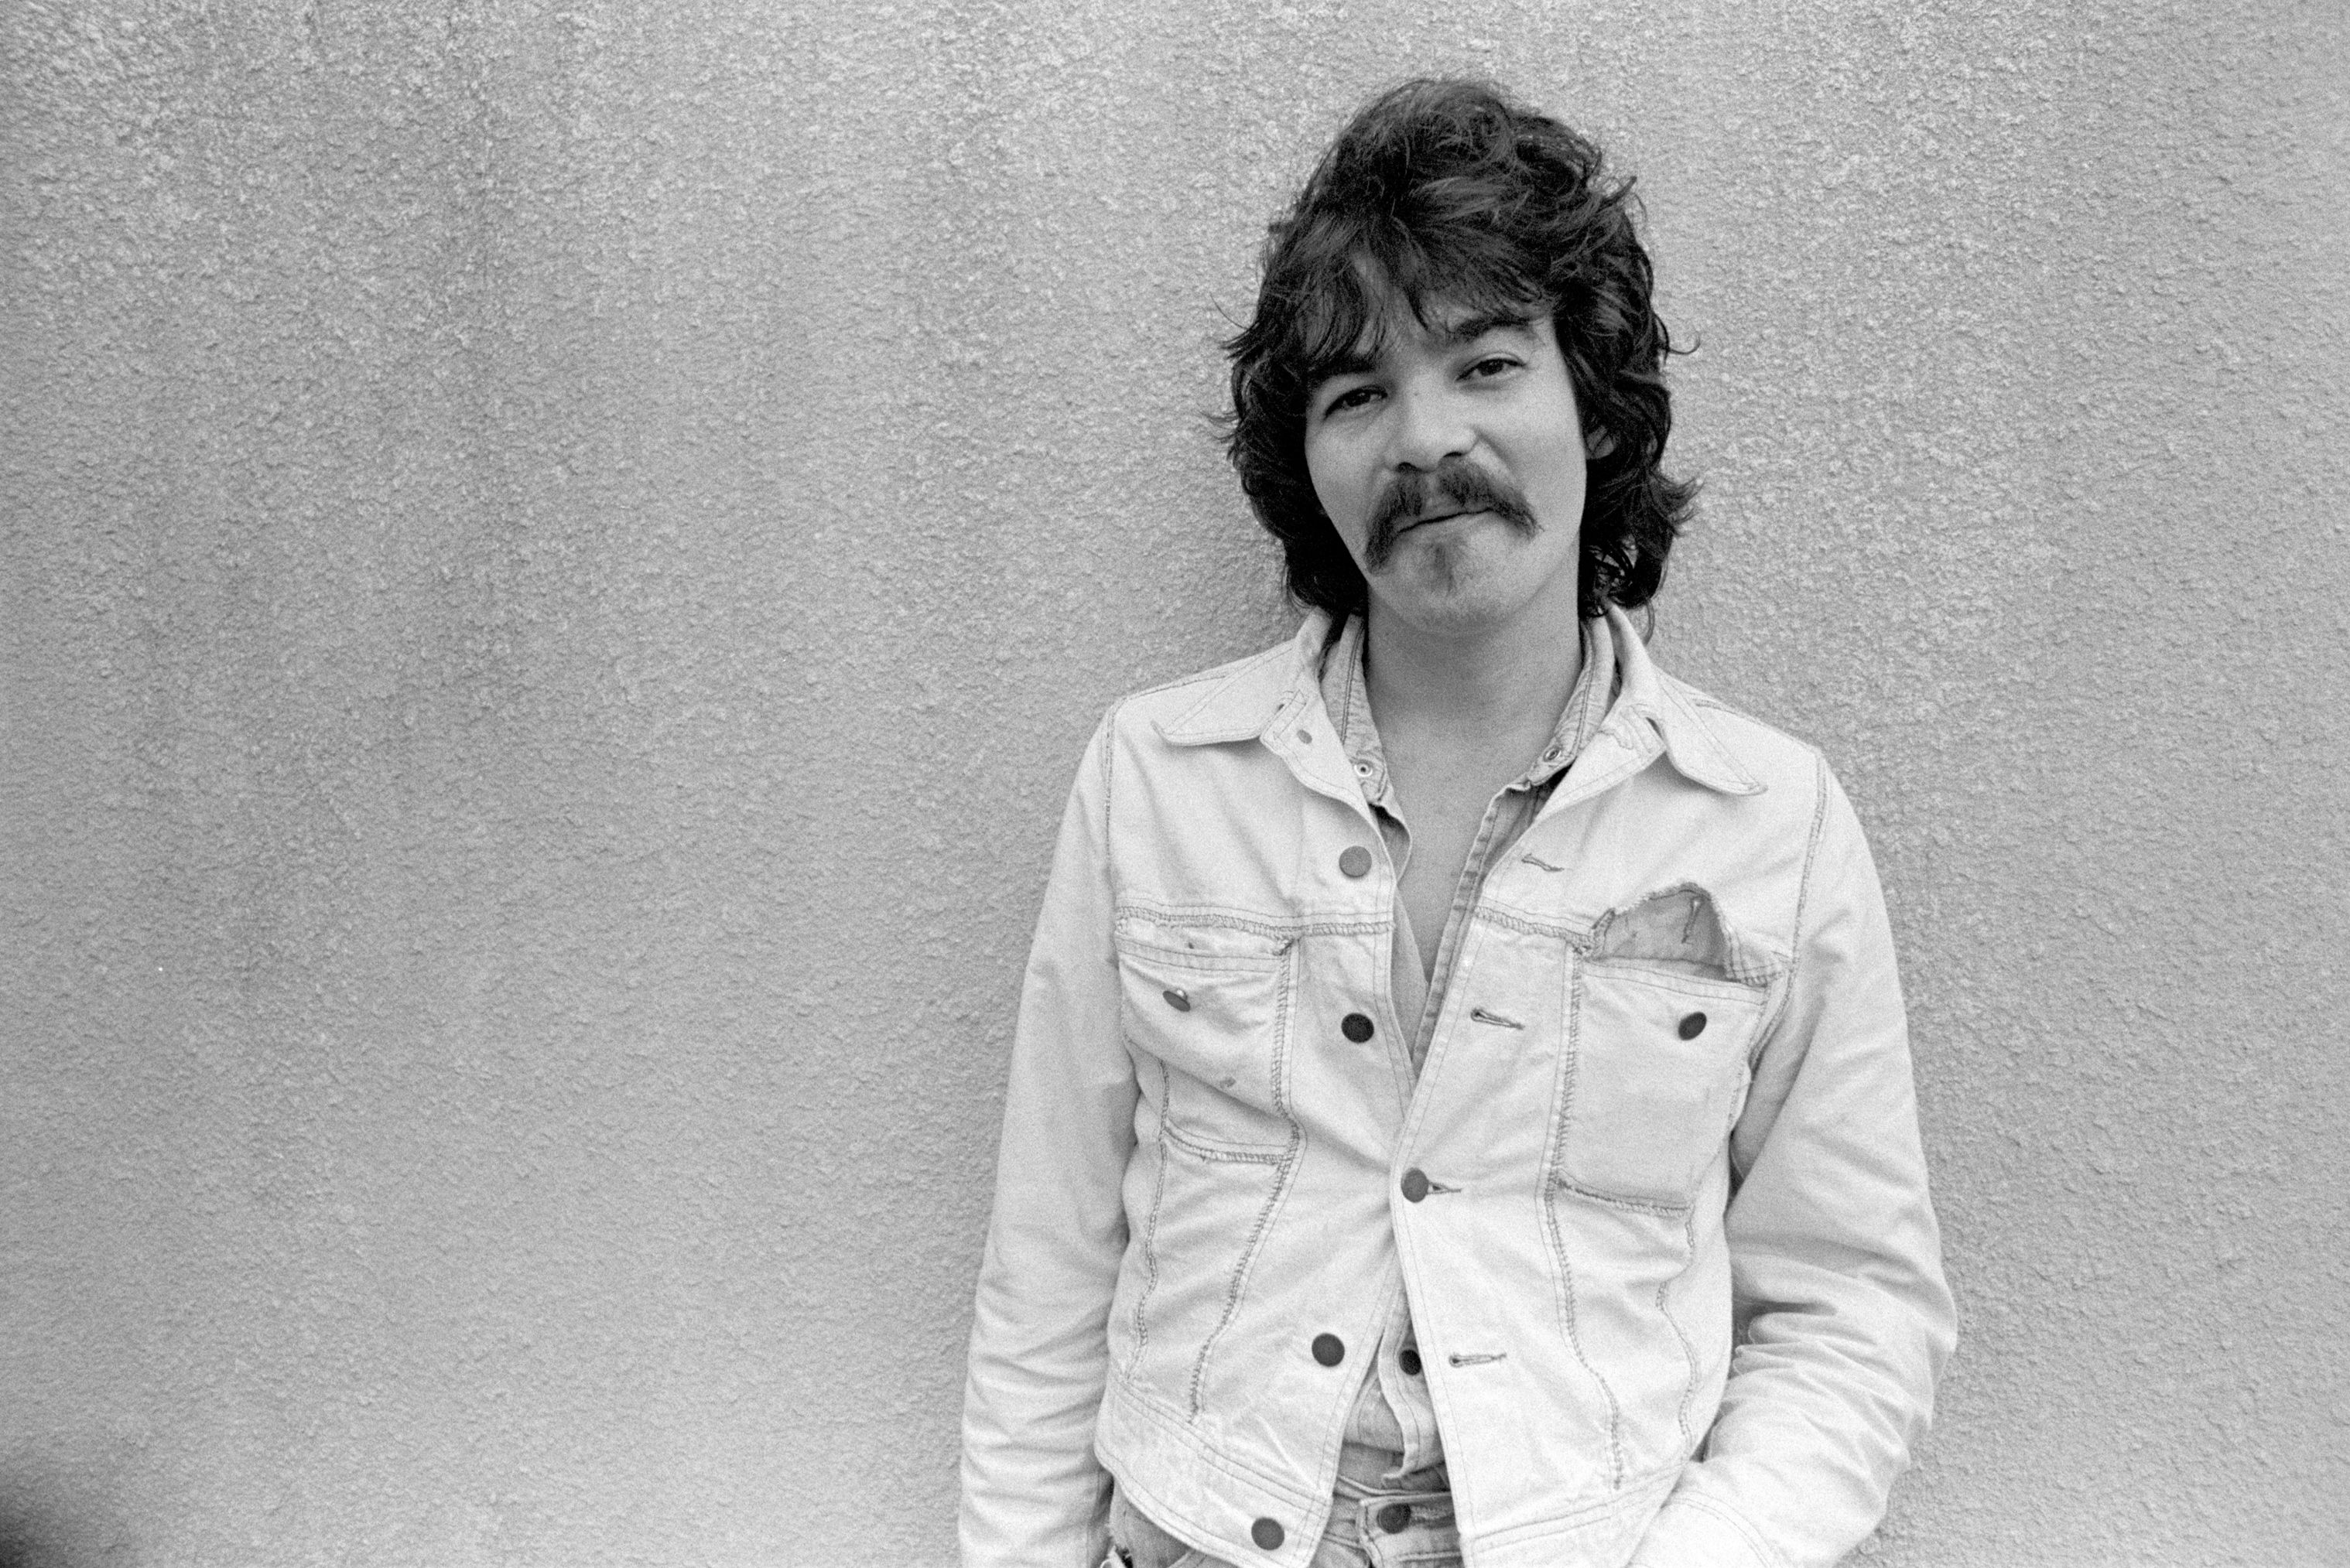 John Prine Tribute John Prine Was Always There The World Didn T Know How Lucky It Was